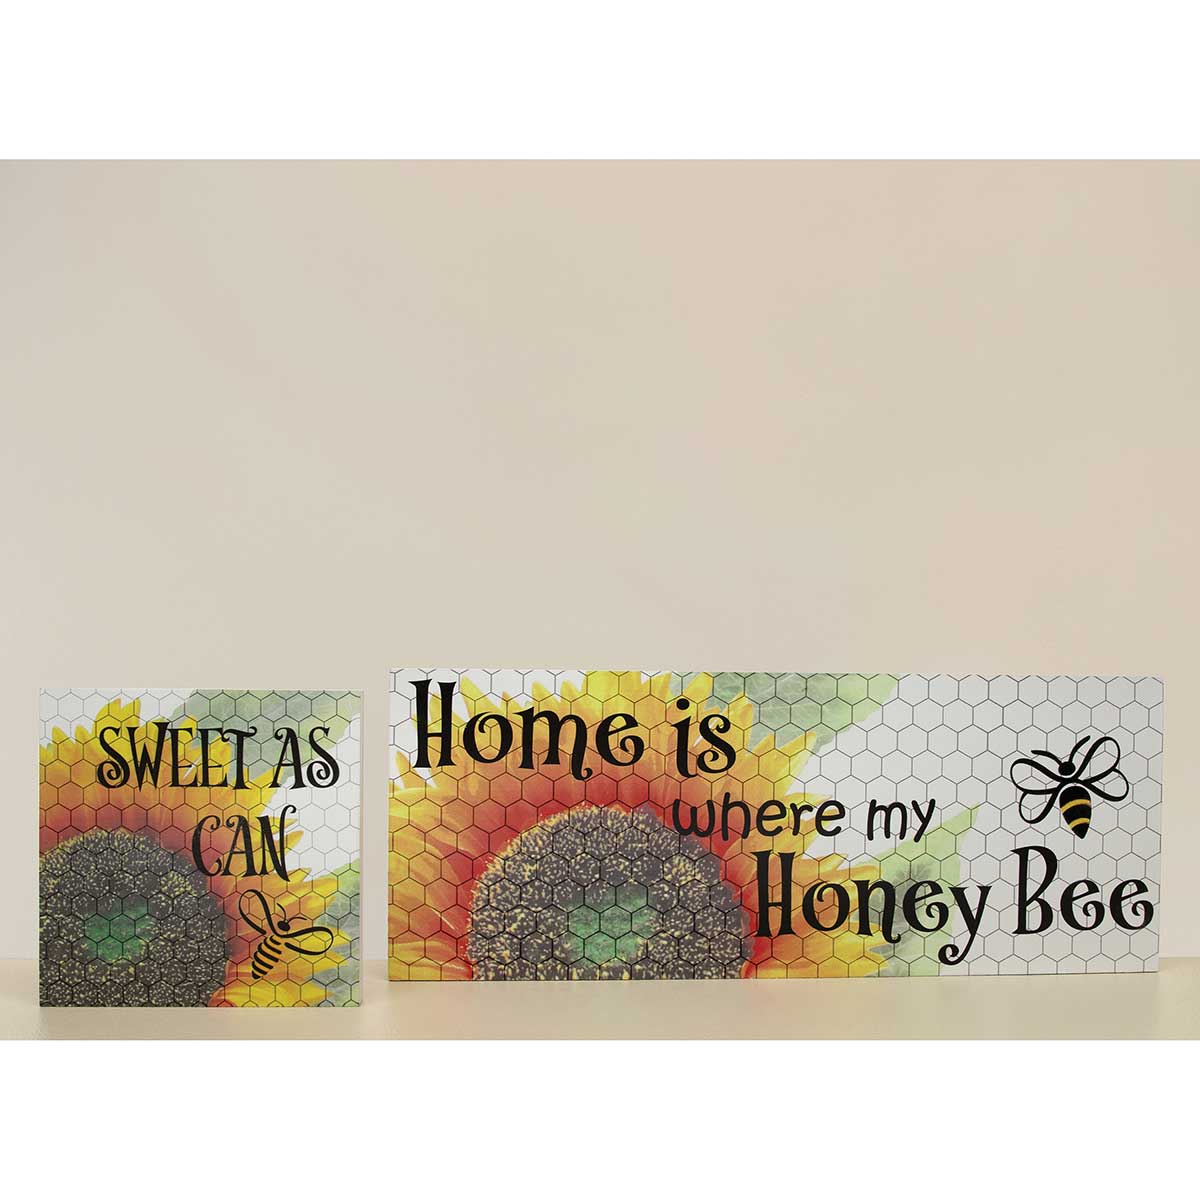 SIGN HOME WHERE MY HONEY BEE 18.25IN X .75IN X 7.5IN